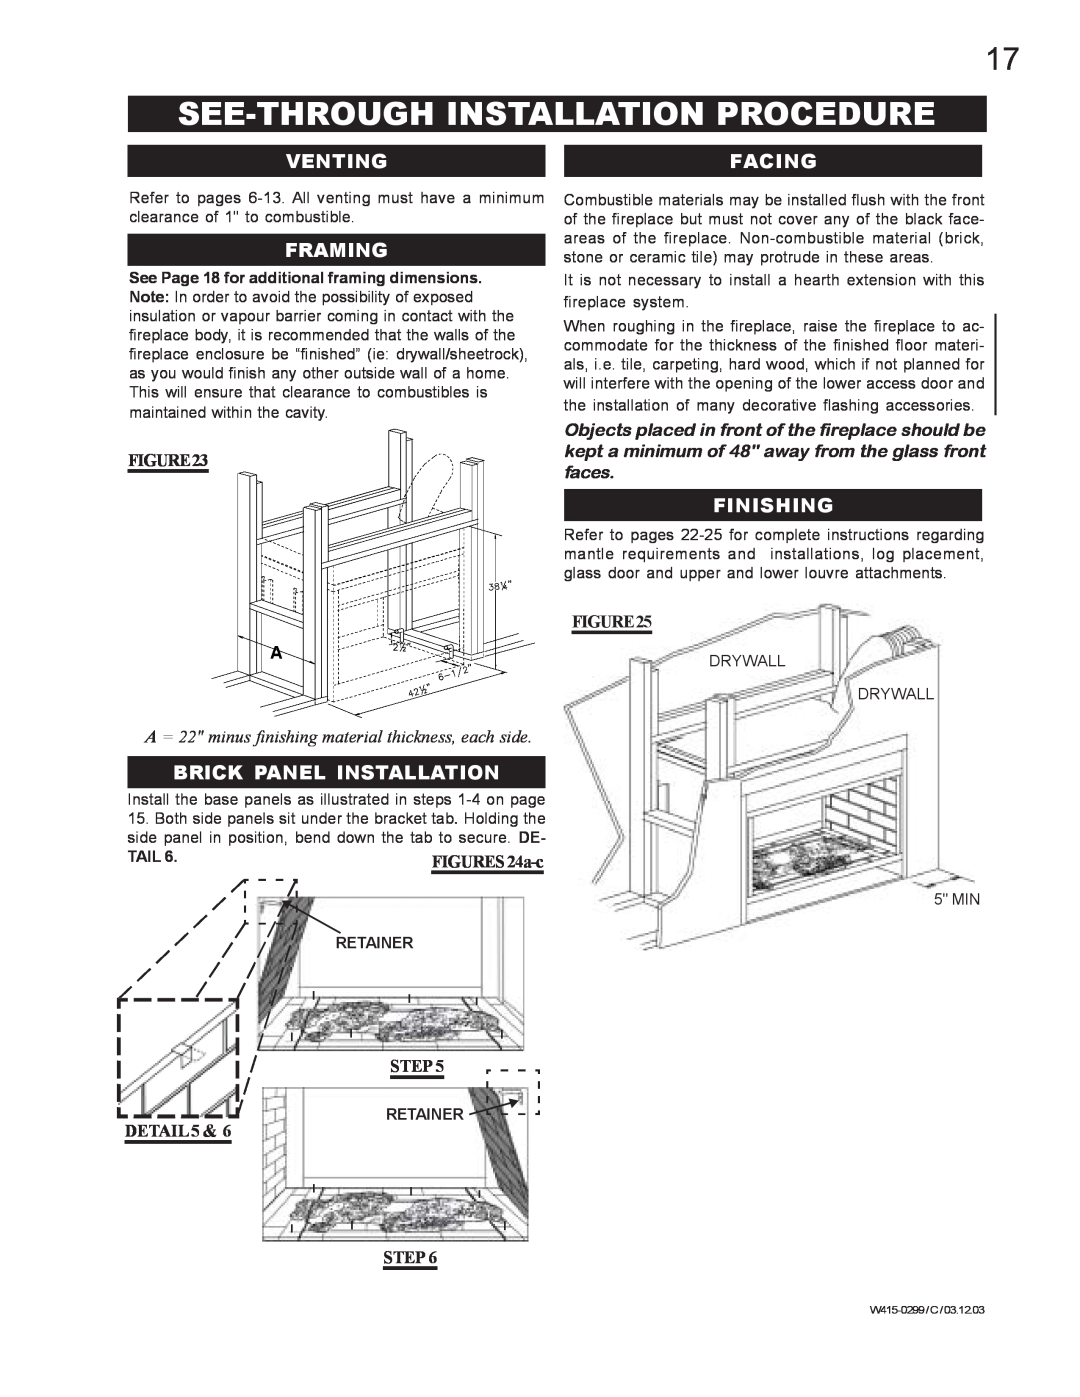 Napoleon Fireplaces BGD40-P See-Throughinstallation Procedure, Venting, Facing, Framing, Finishing, FIGURES24a-c, Step 